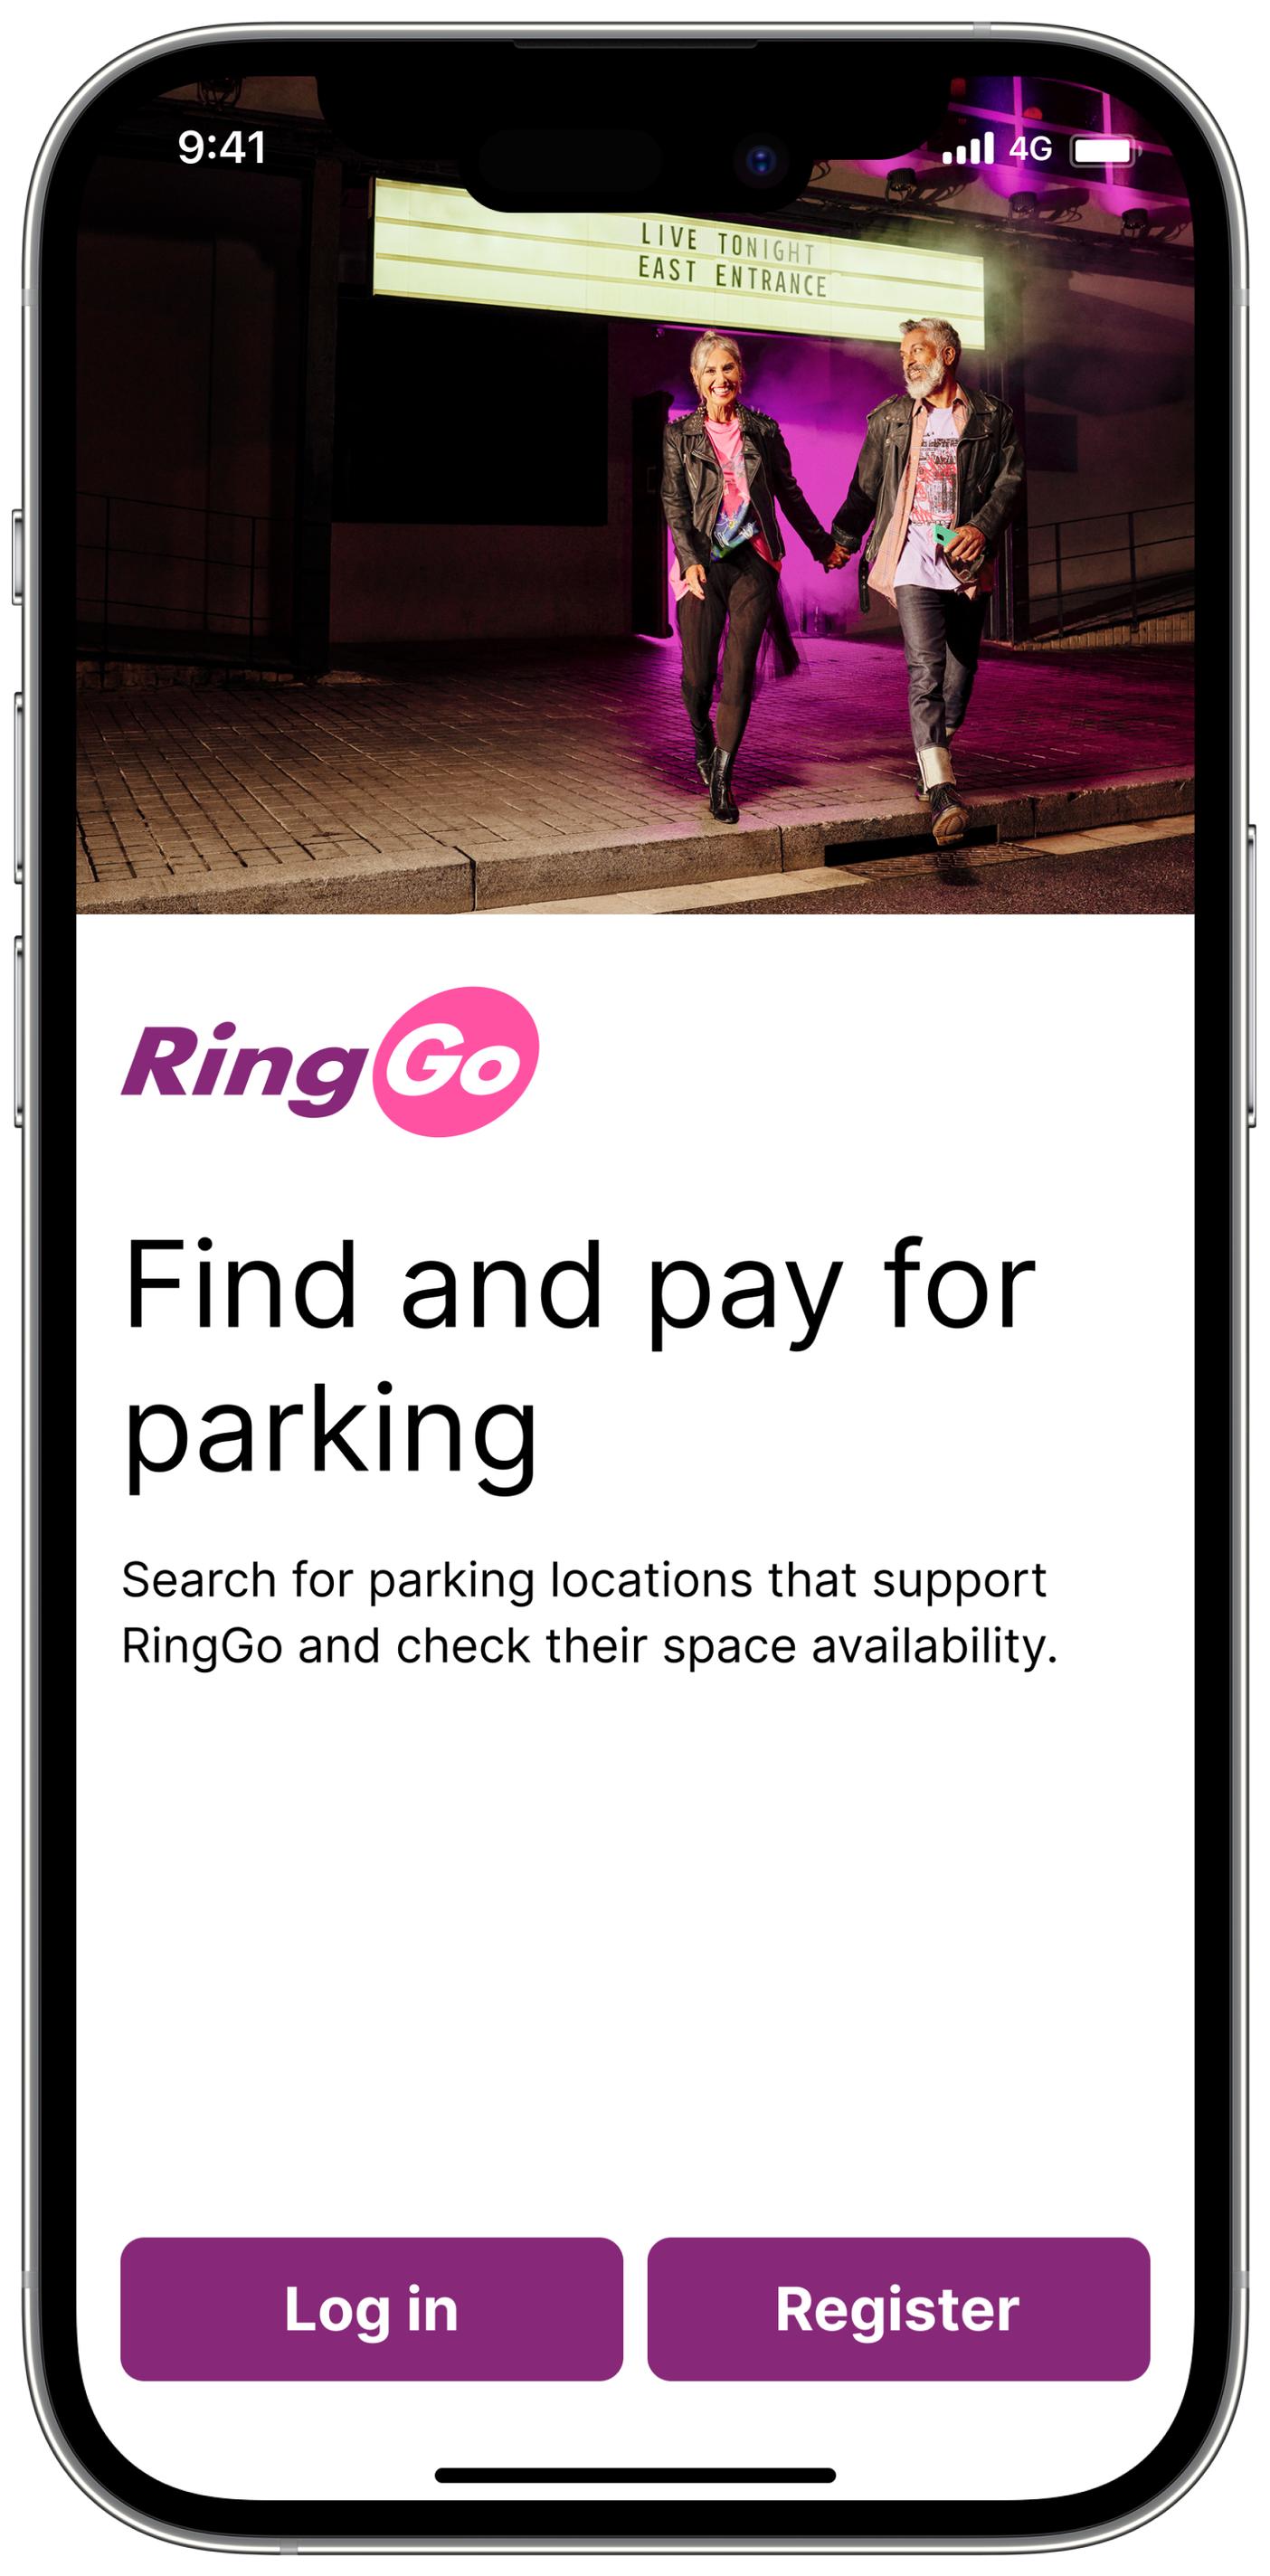 The new pink and purple logo as it will appear on the RingGo app